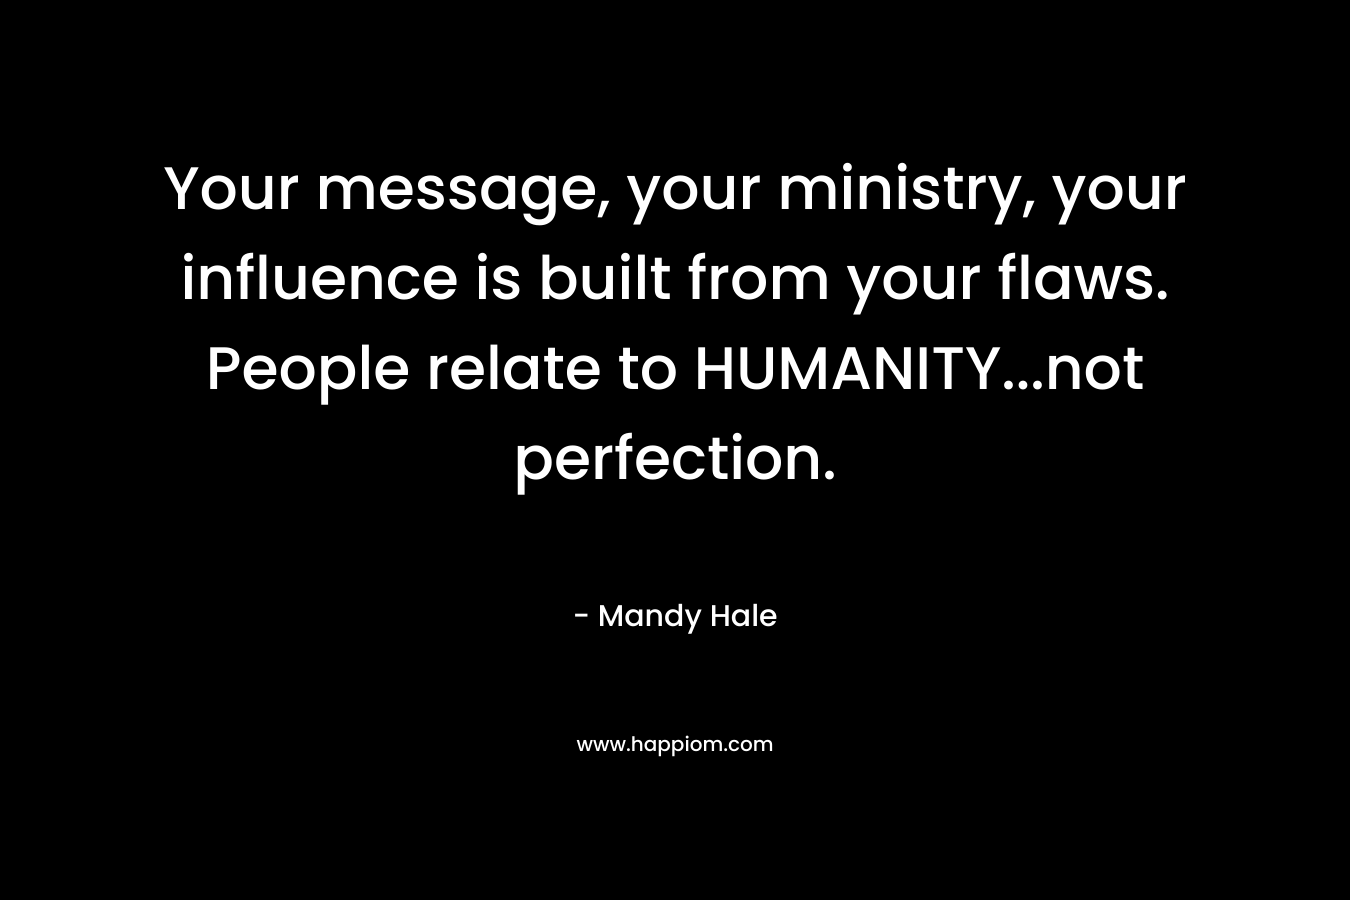 Your message, your ministry, your influence is built from your flaws. People relate to HUMANITY...not perfection.